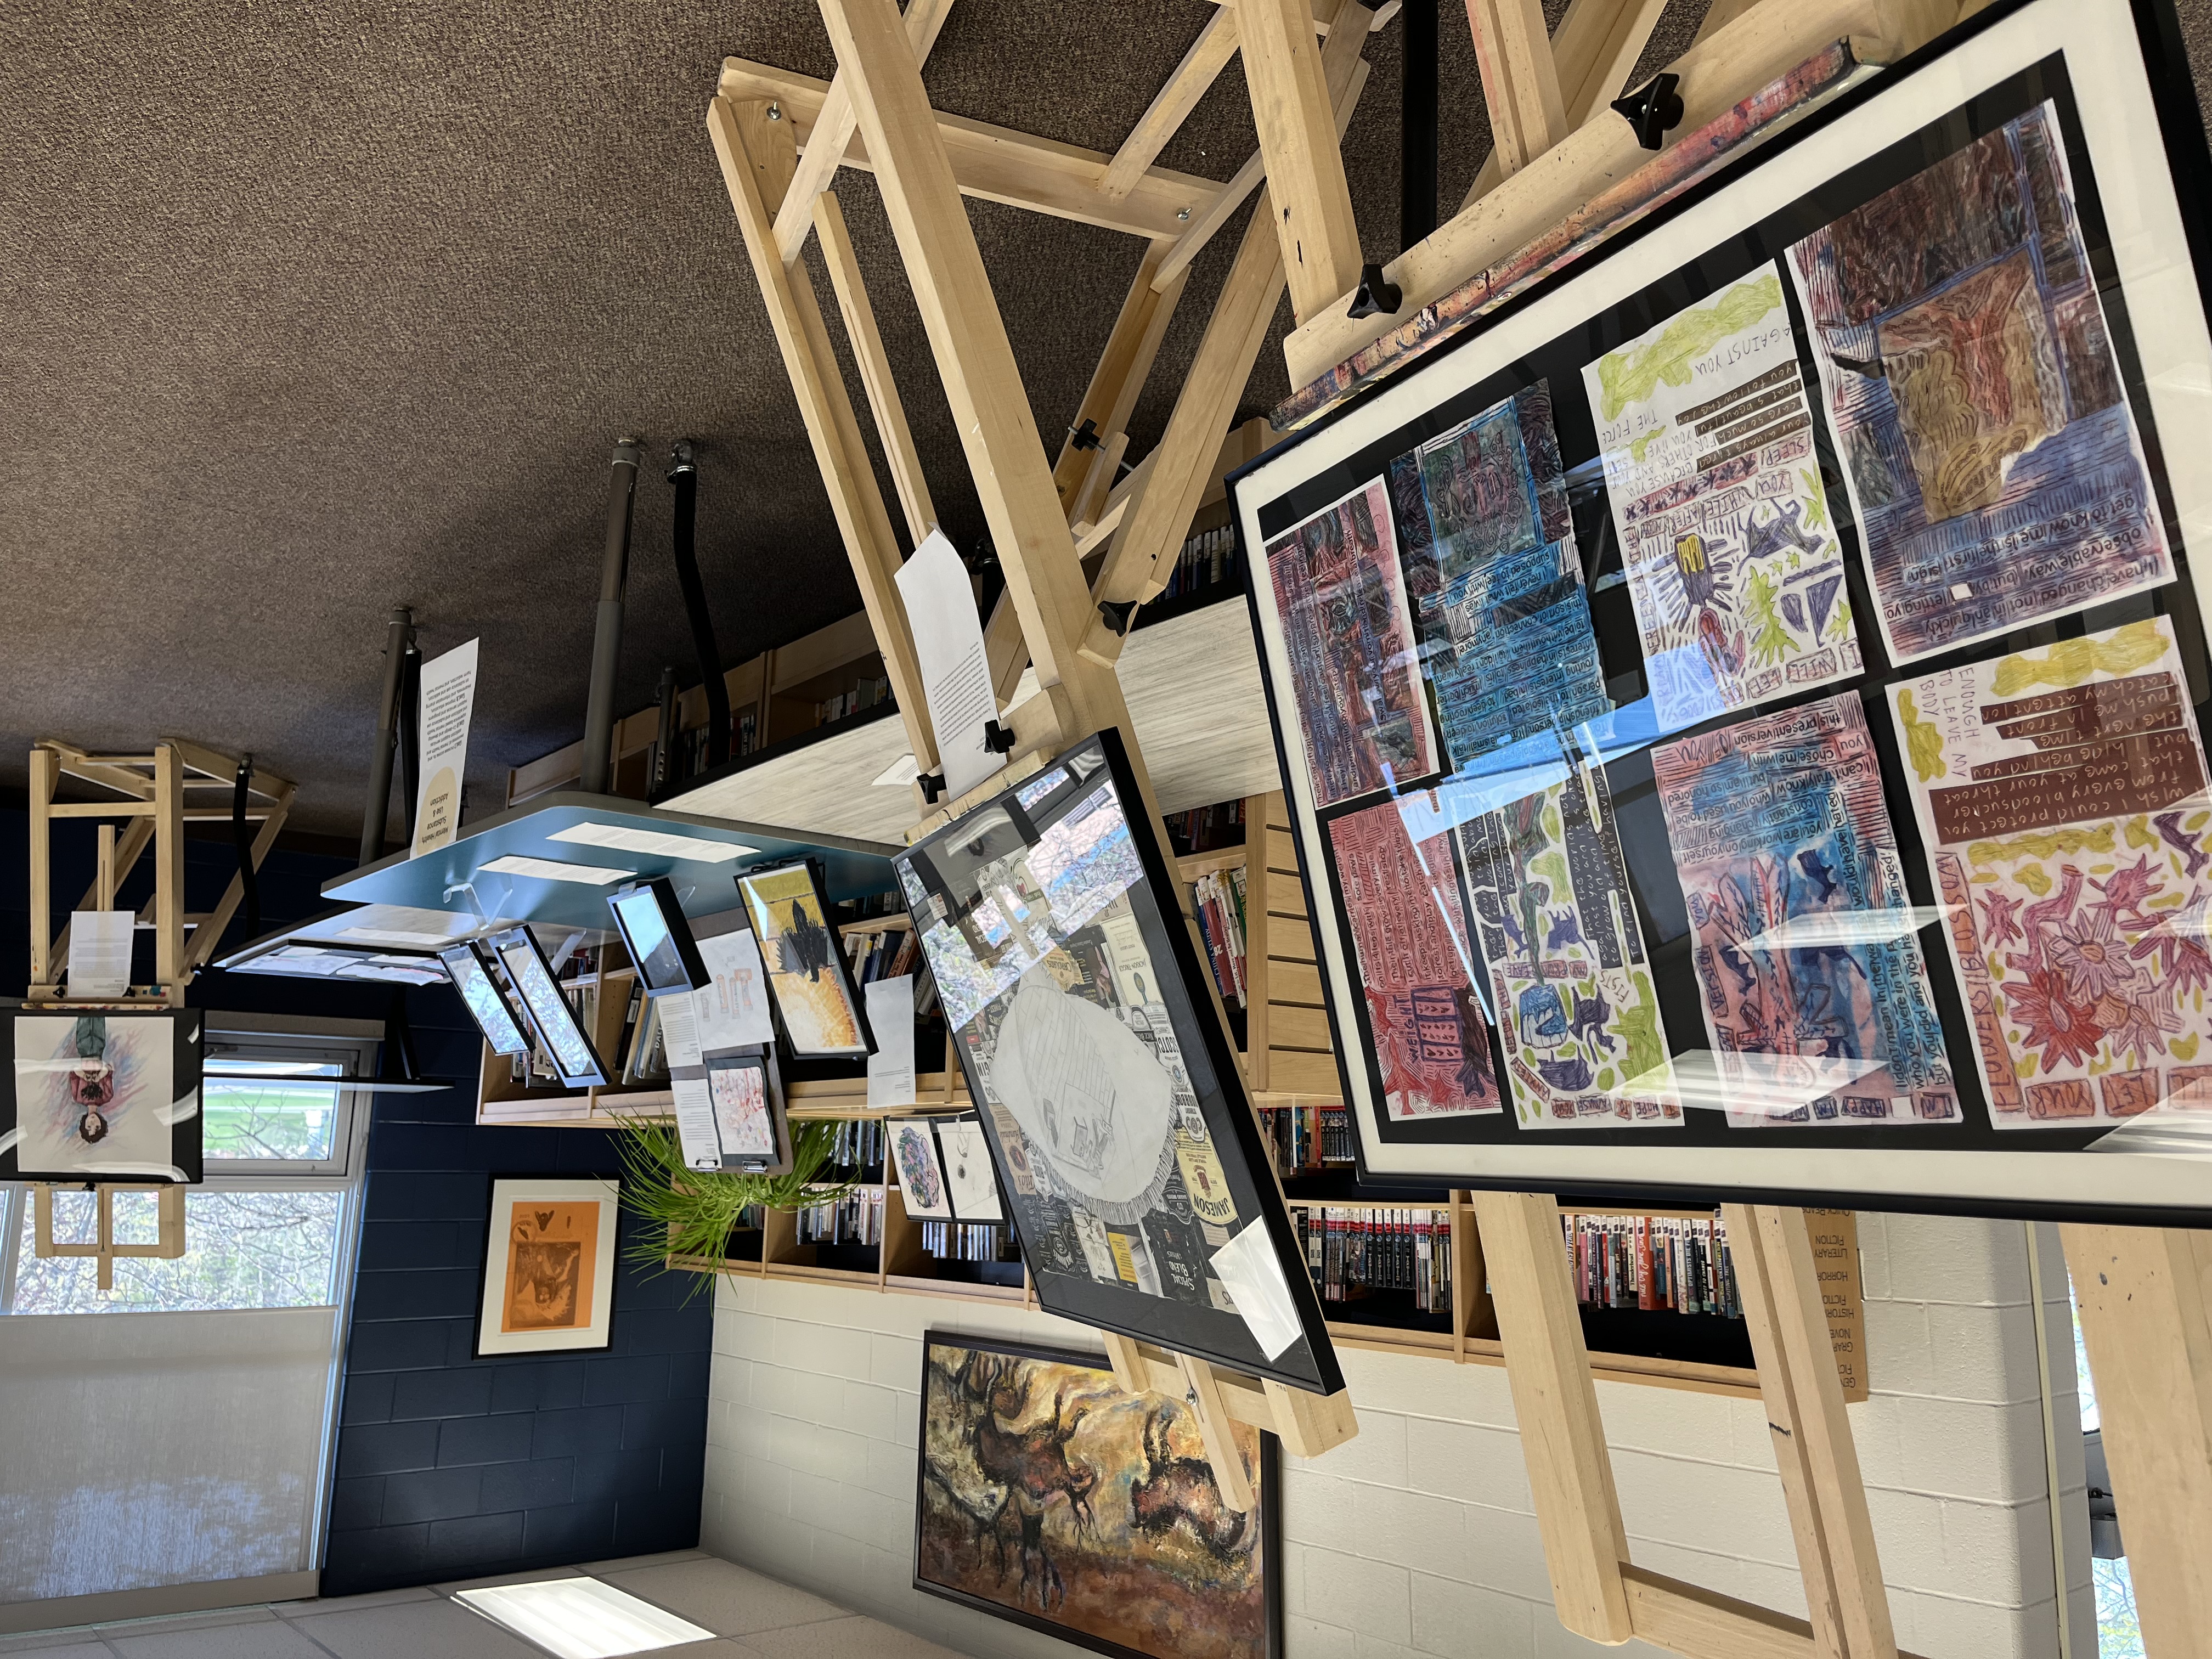 A view of the CSWB Youth Art Exhibition held at HHSS on May 10. Artwork arranged on easels can be seen in foreground and background.